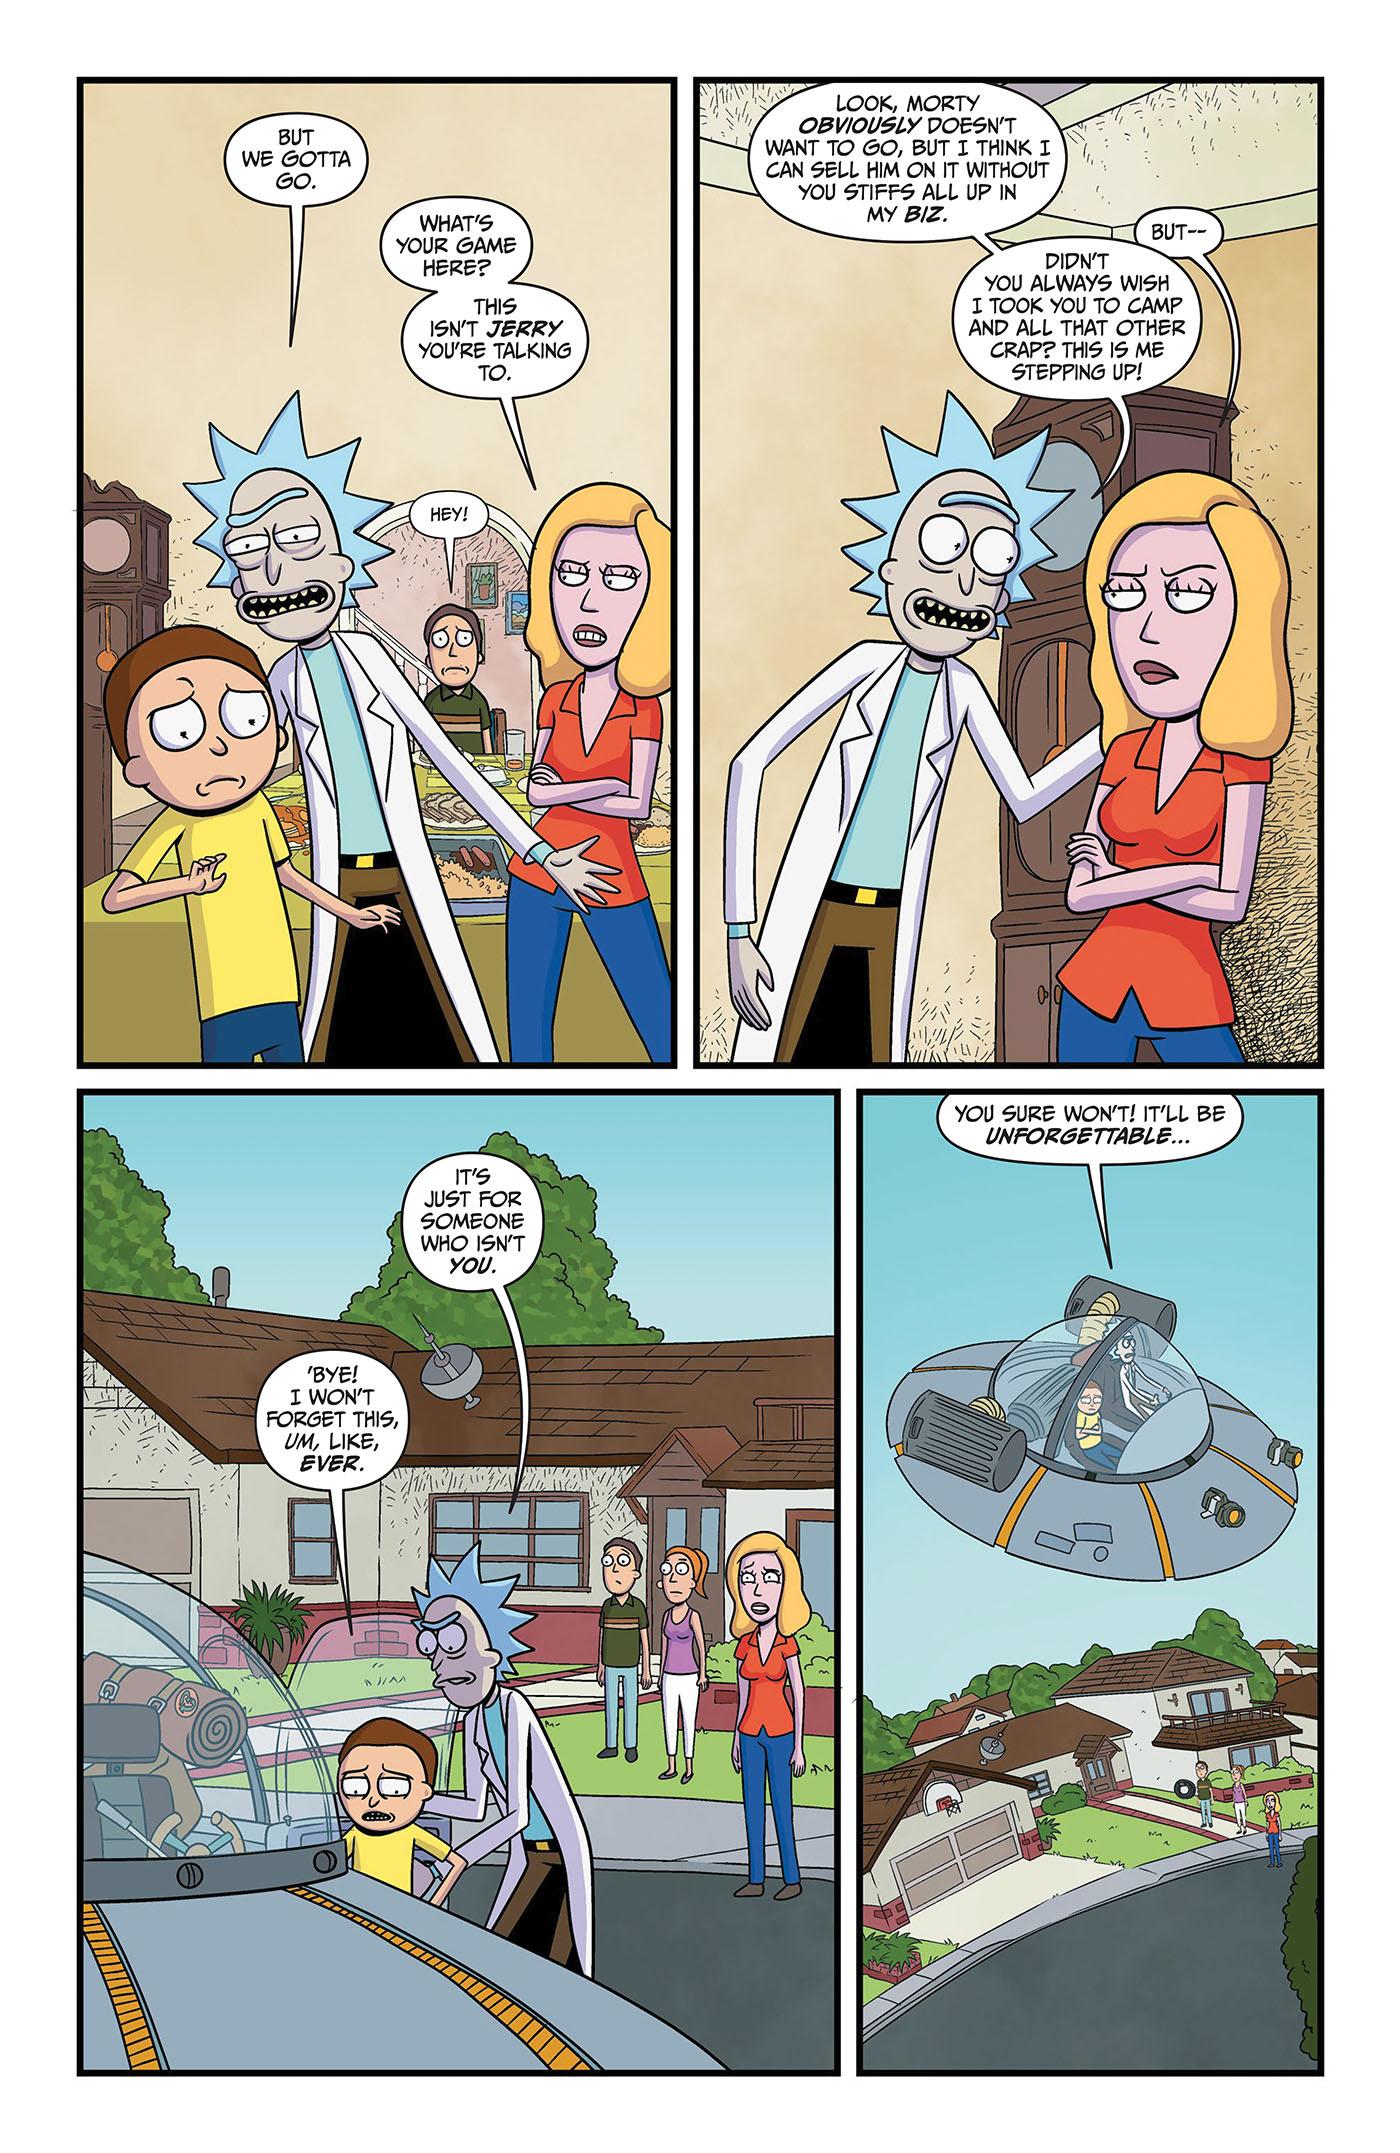 Rick and Morty Presents Mortys Run #1 Cover B Feister